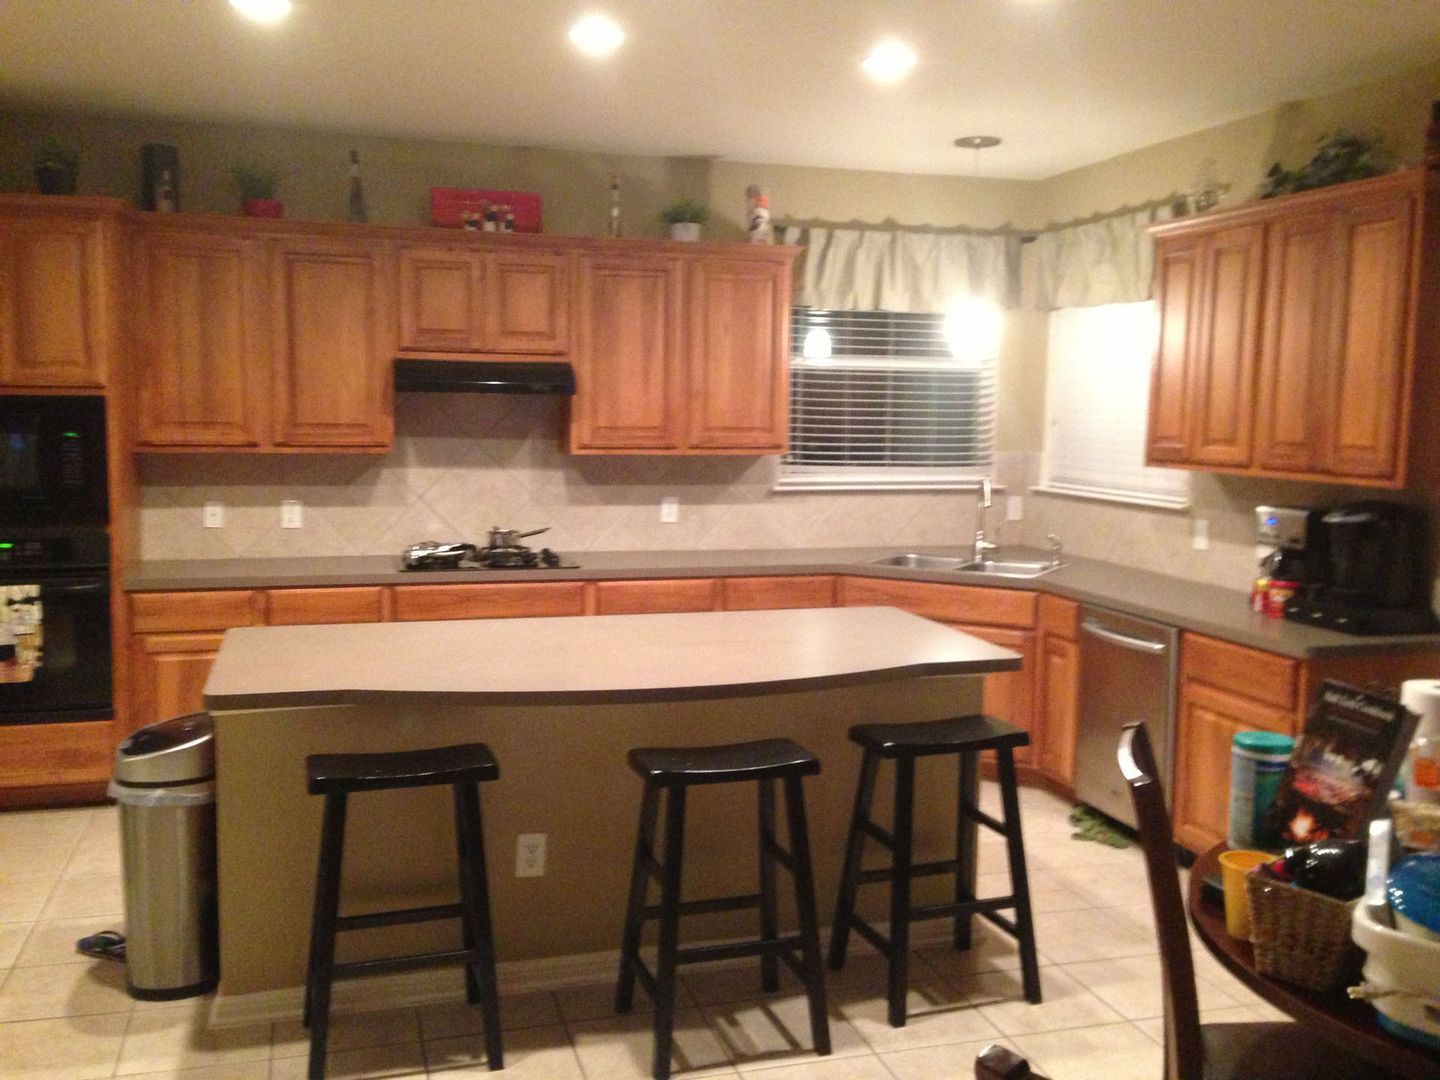 A kitchen with a large island and stools